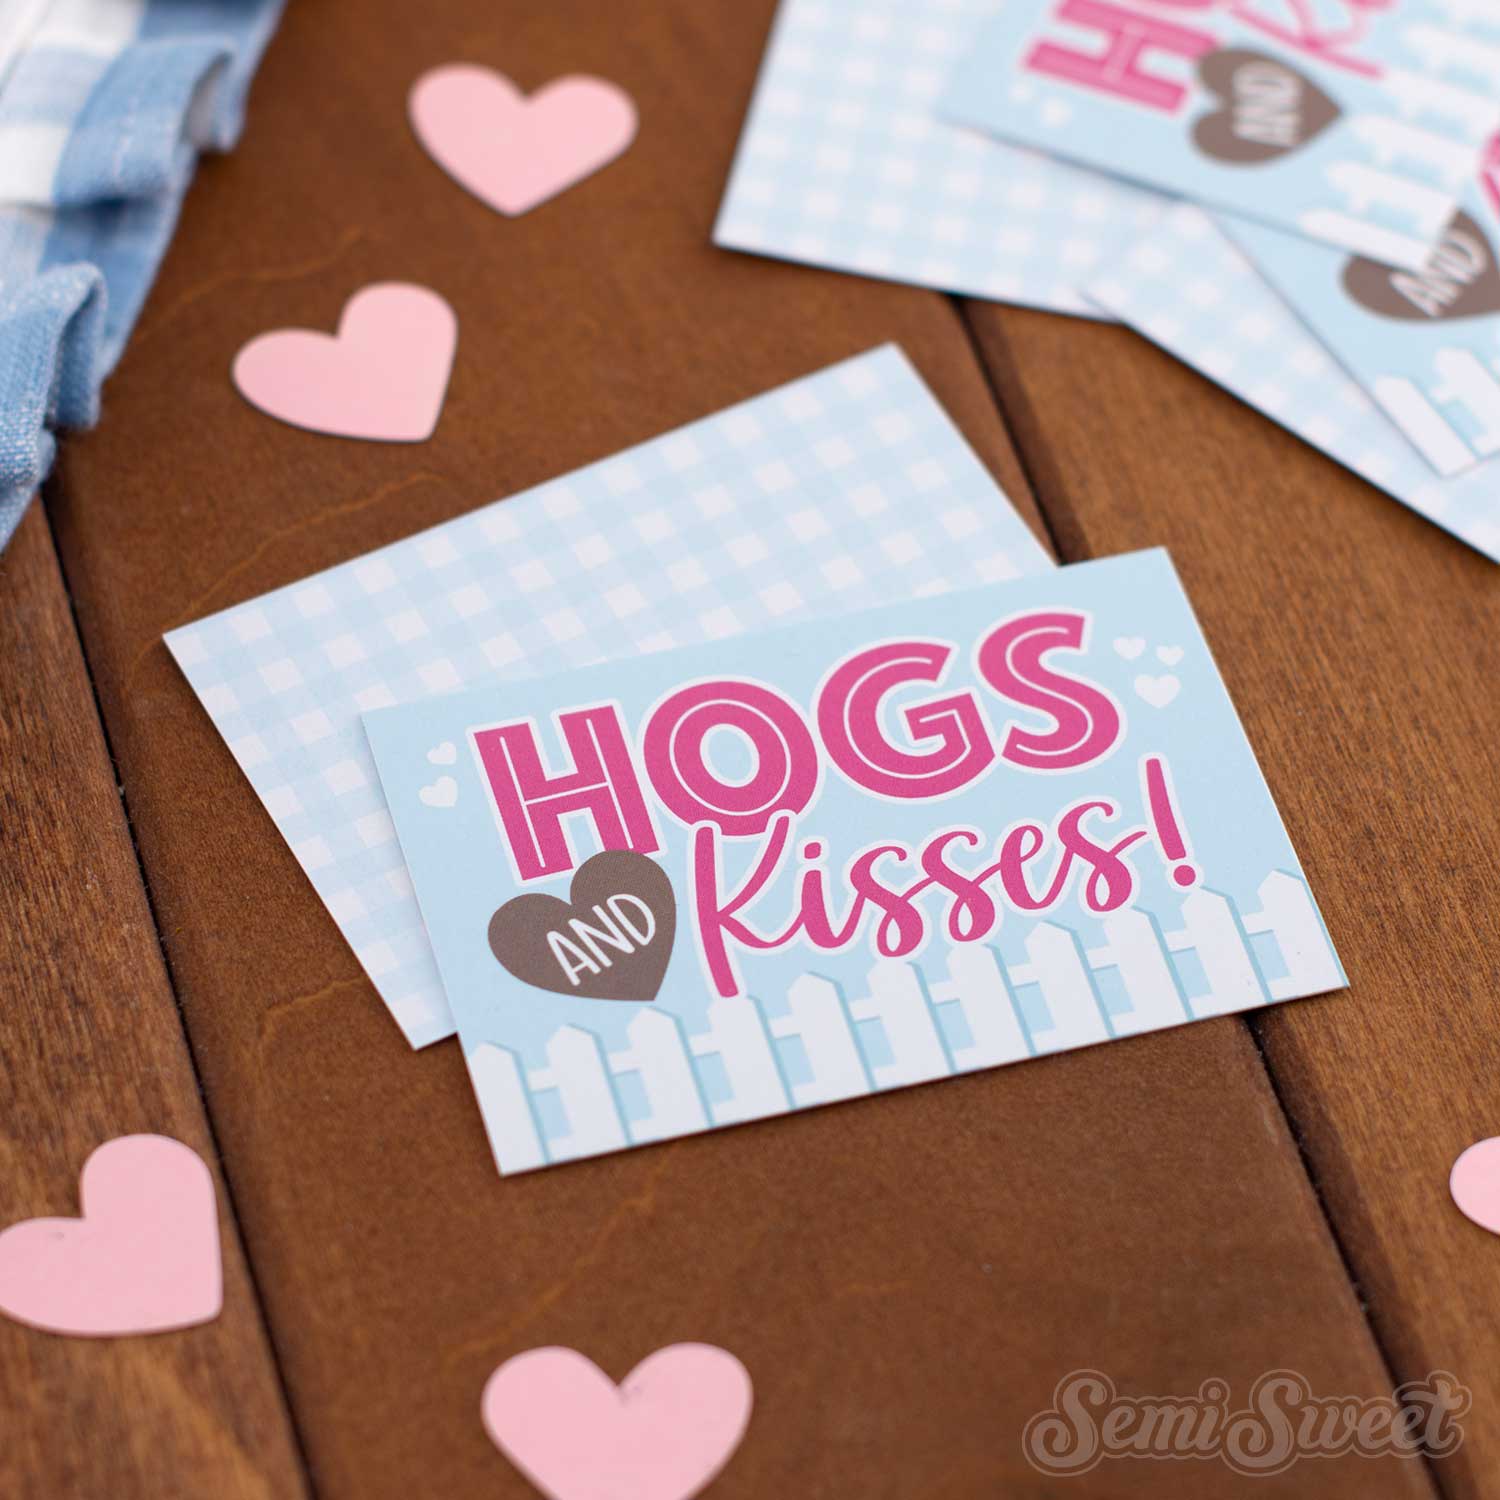 hogs and kisses tag